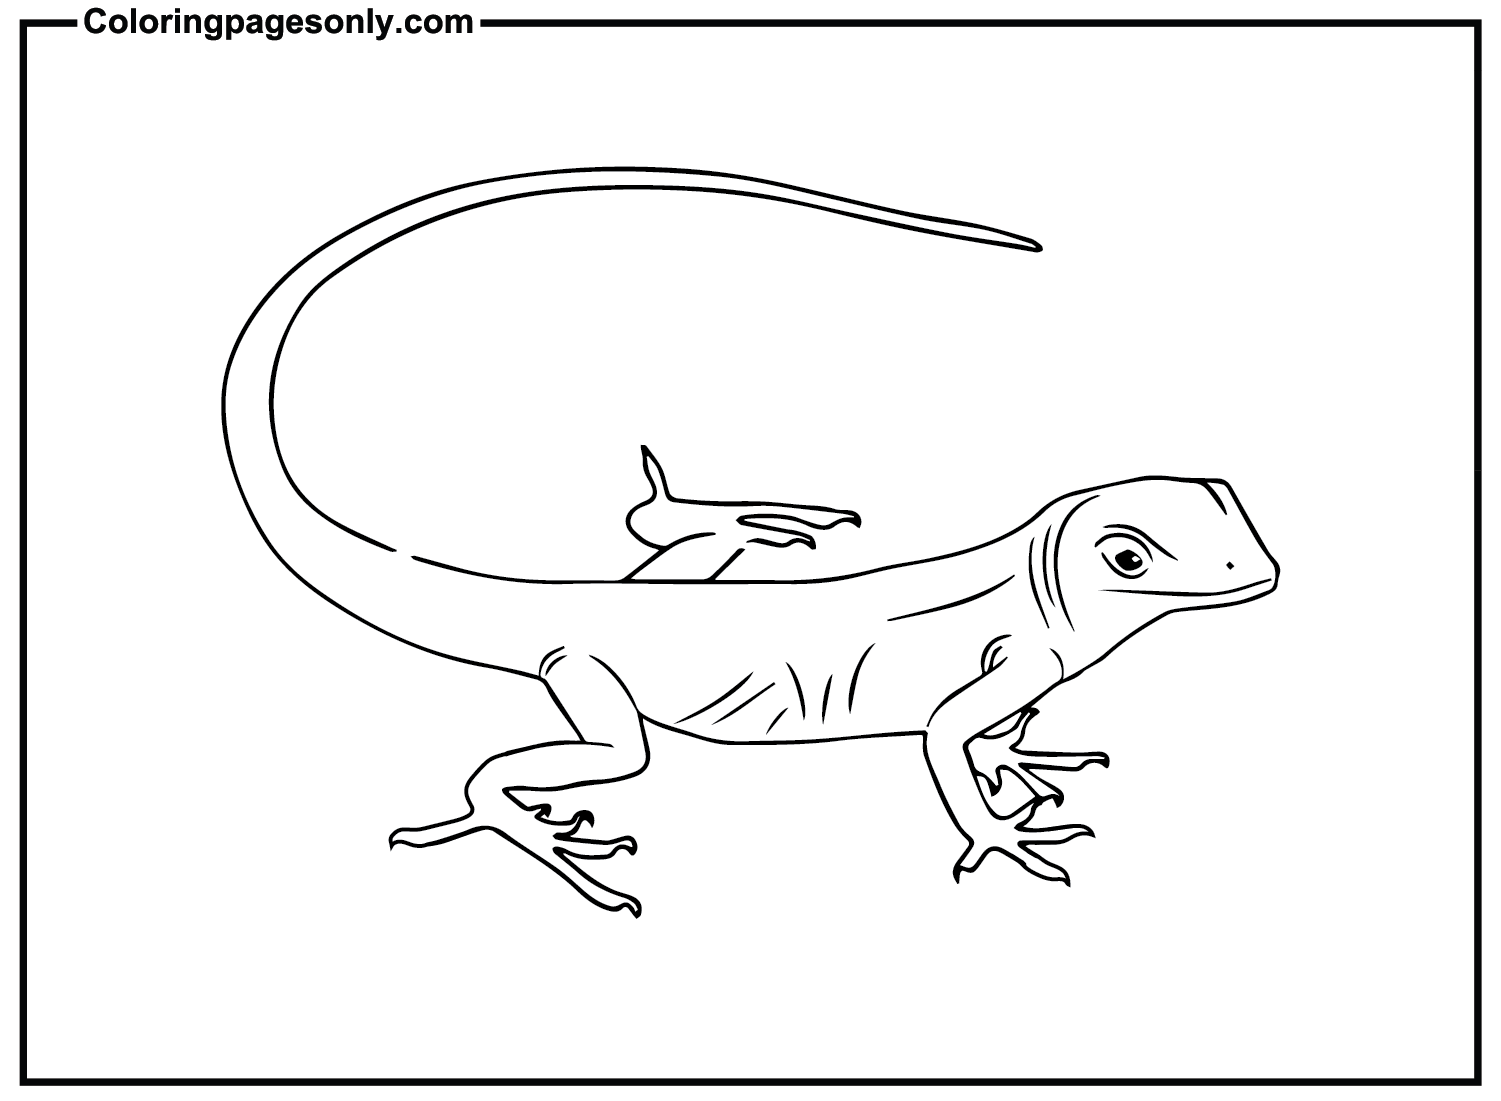 Skink Images Coloring Pages